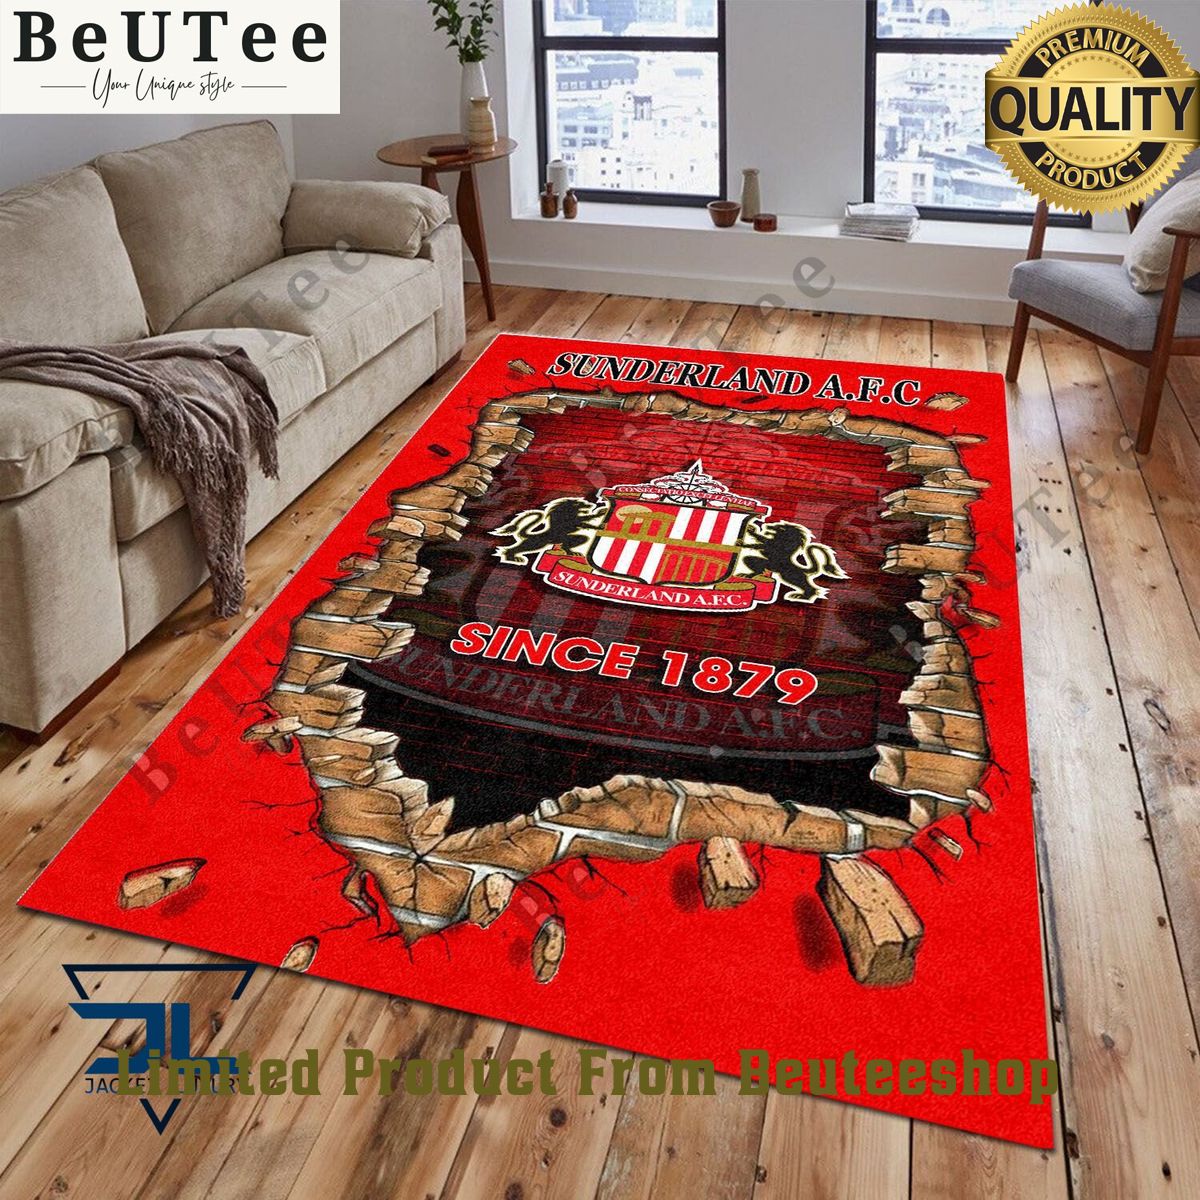 EPL Sunderland A.F.C 1814 Premier League Limited Rug Carpet Out of the world